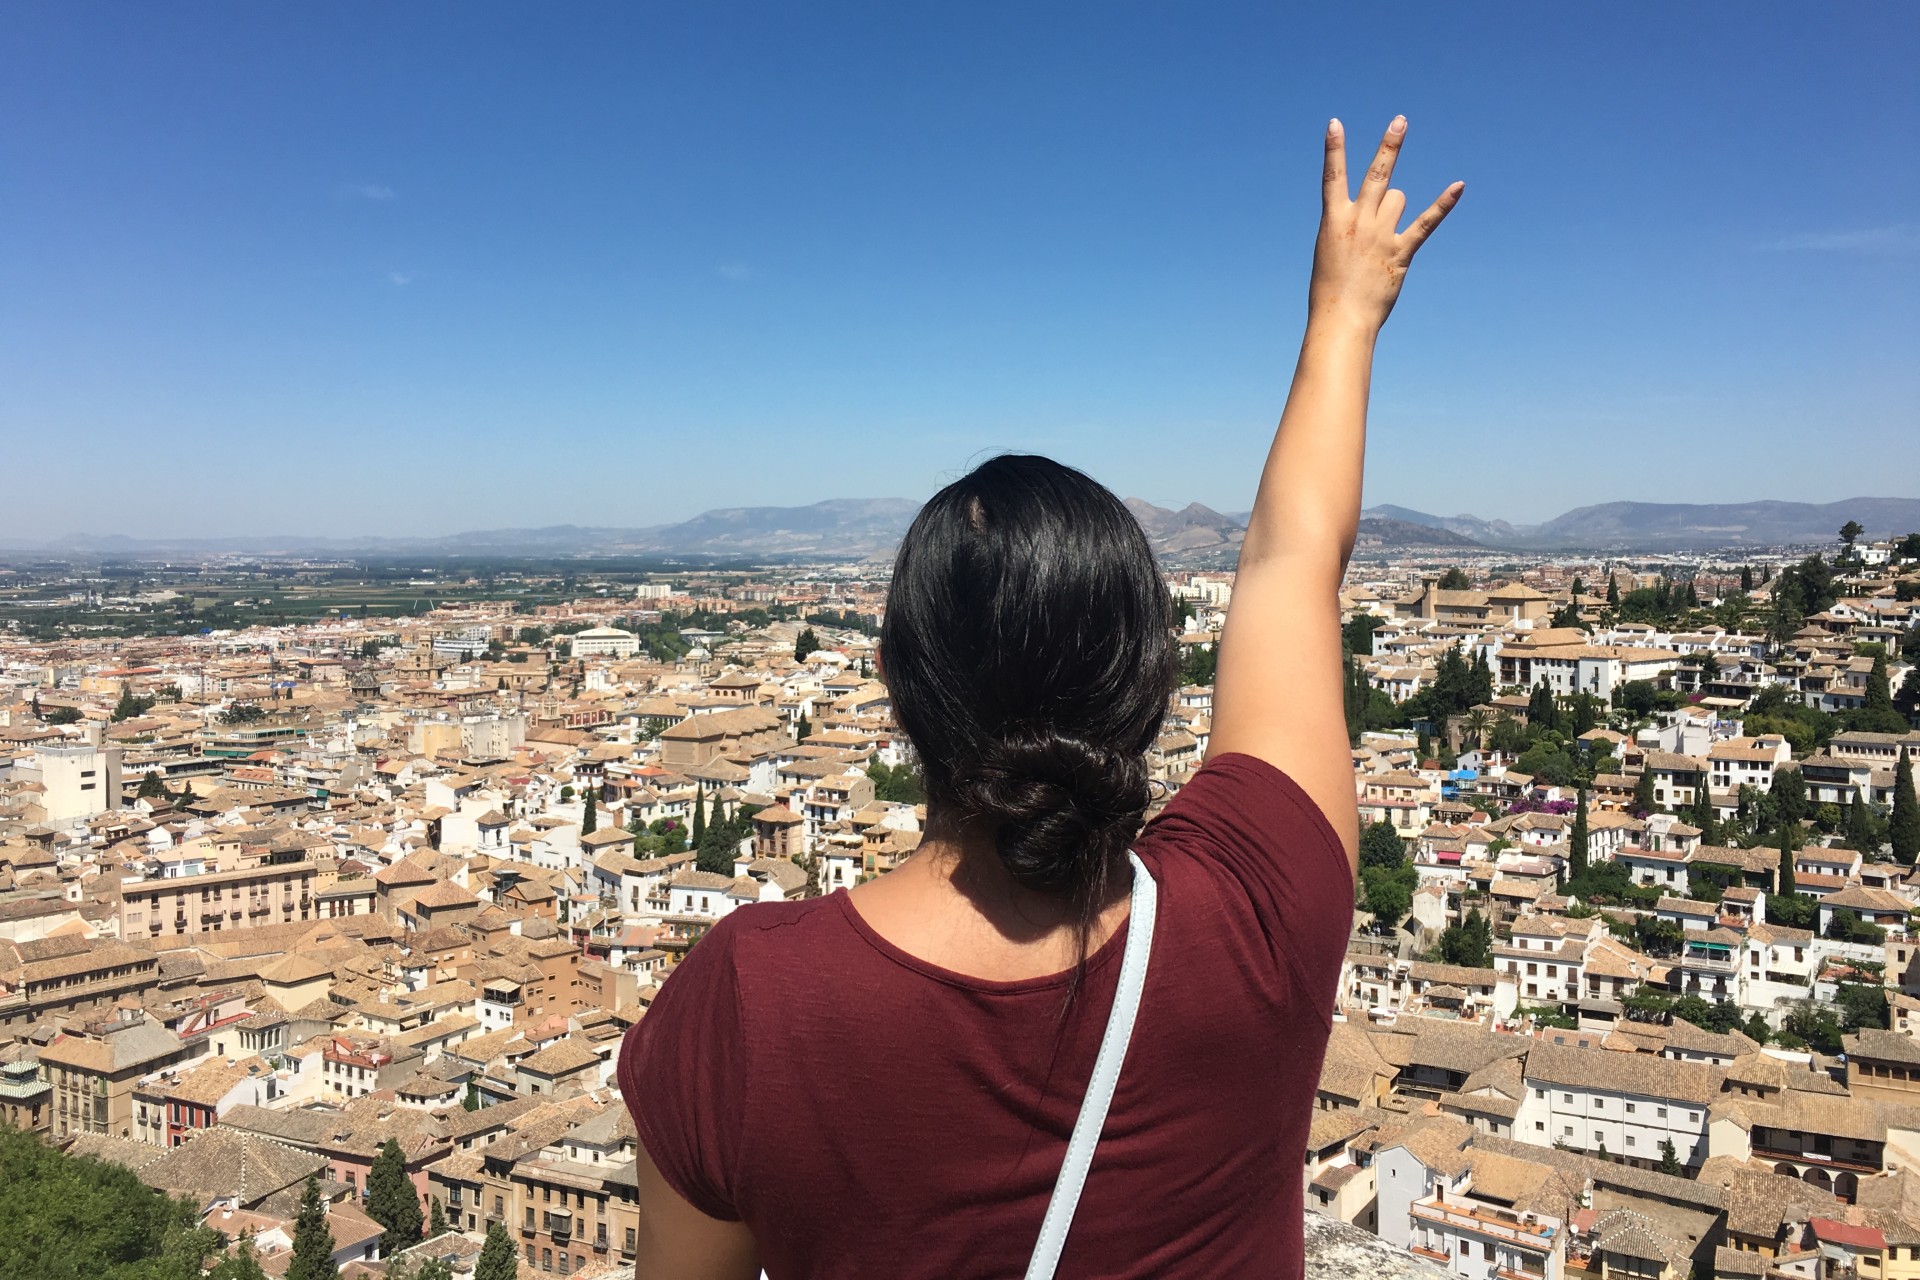 Student abroad giving a Coogs hand sign against bright blue sky